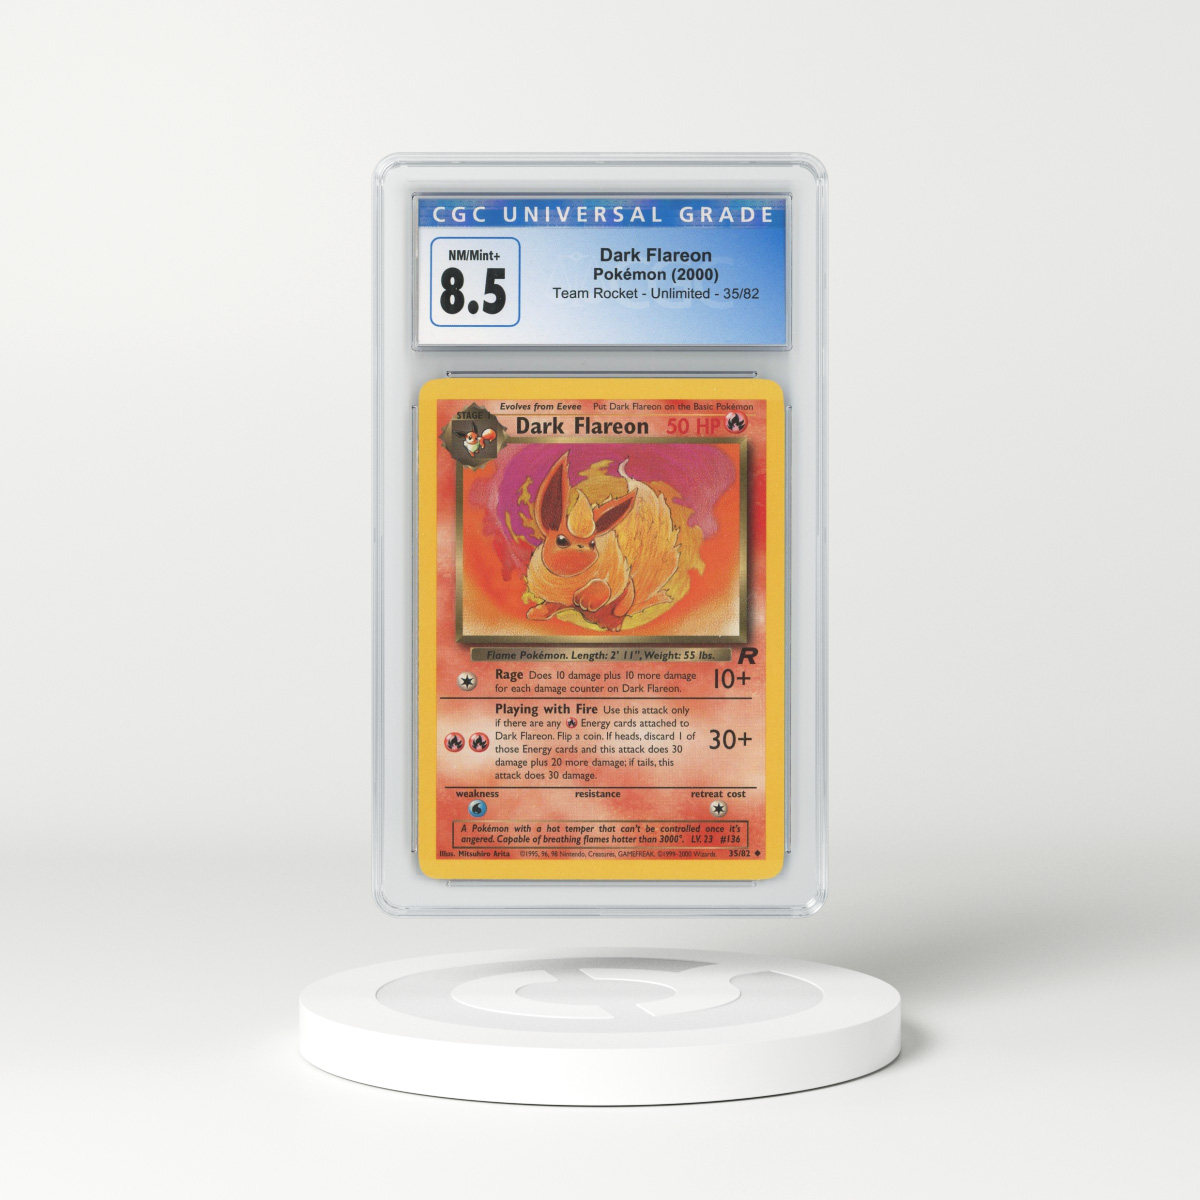 A Pokémon card 'holy grail', one of only a dozen copies in perfect  condition, just sold for $175,000